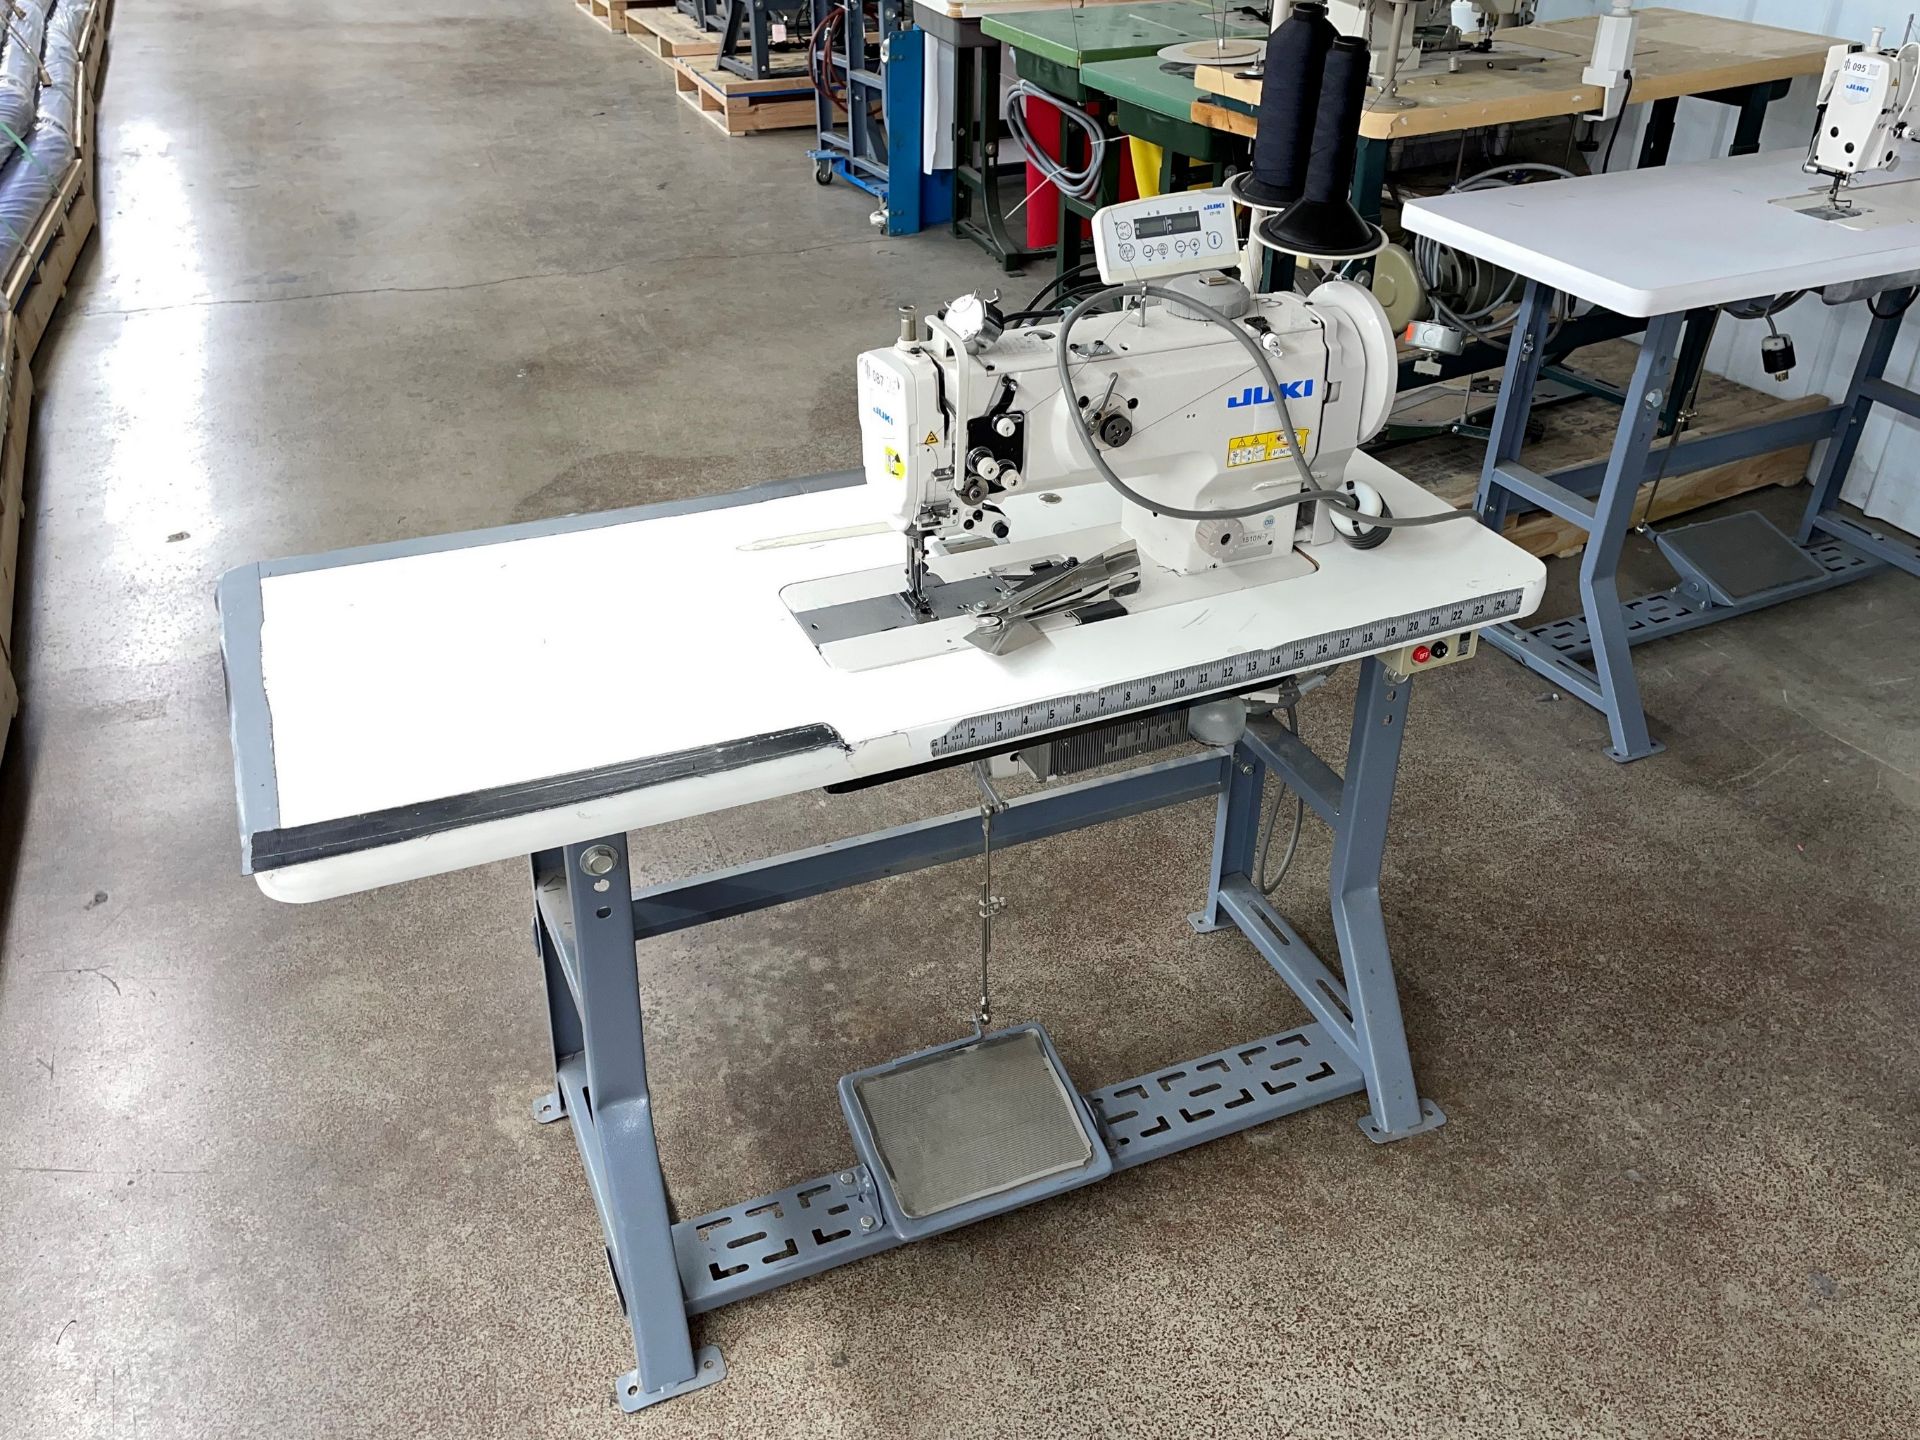 Juki Industrial Sewing Machine with Table - Image 10 of 10